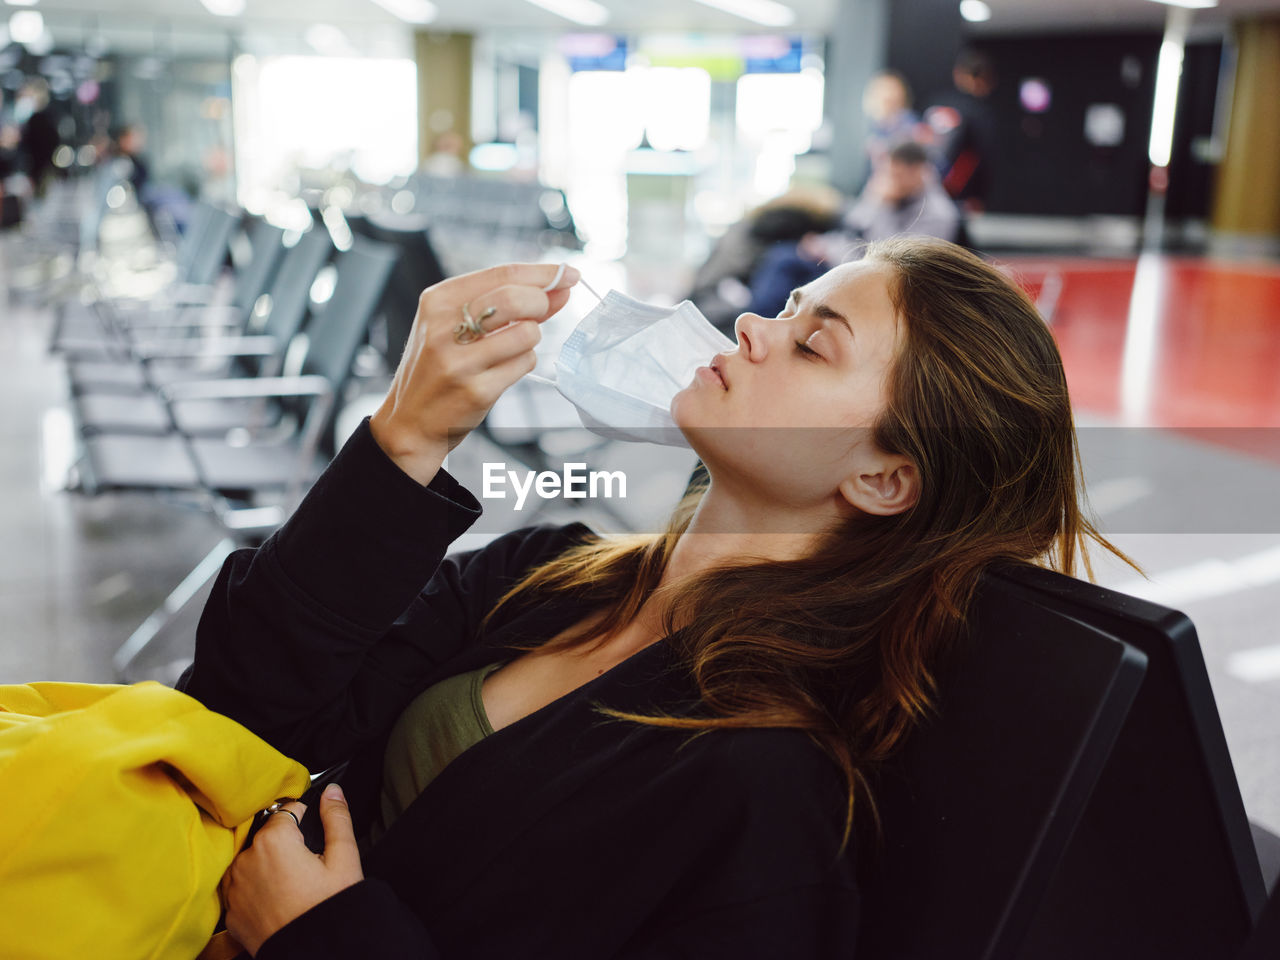 Woman removing mask while sitting at airport